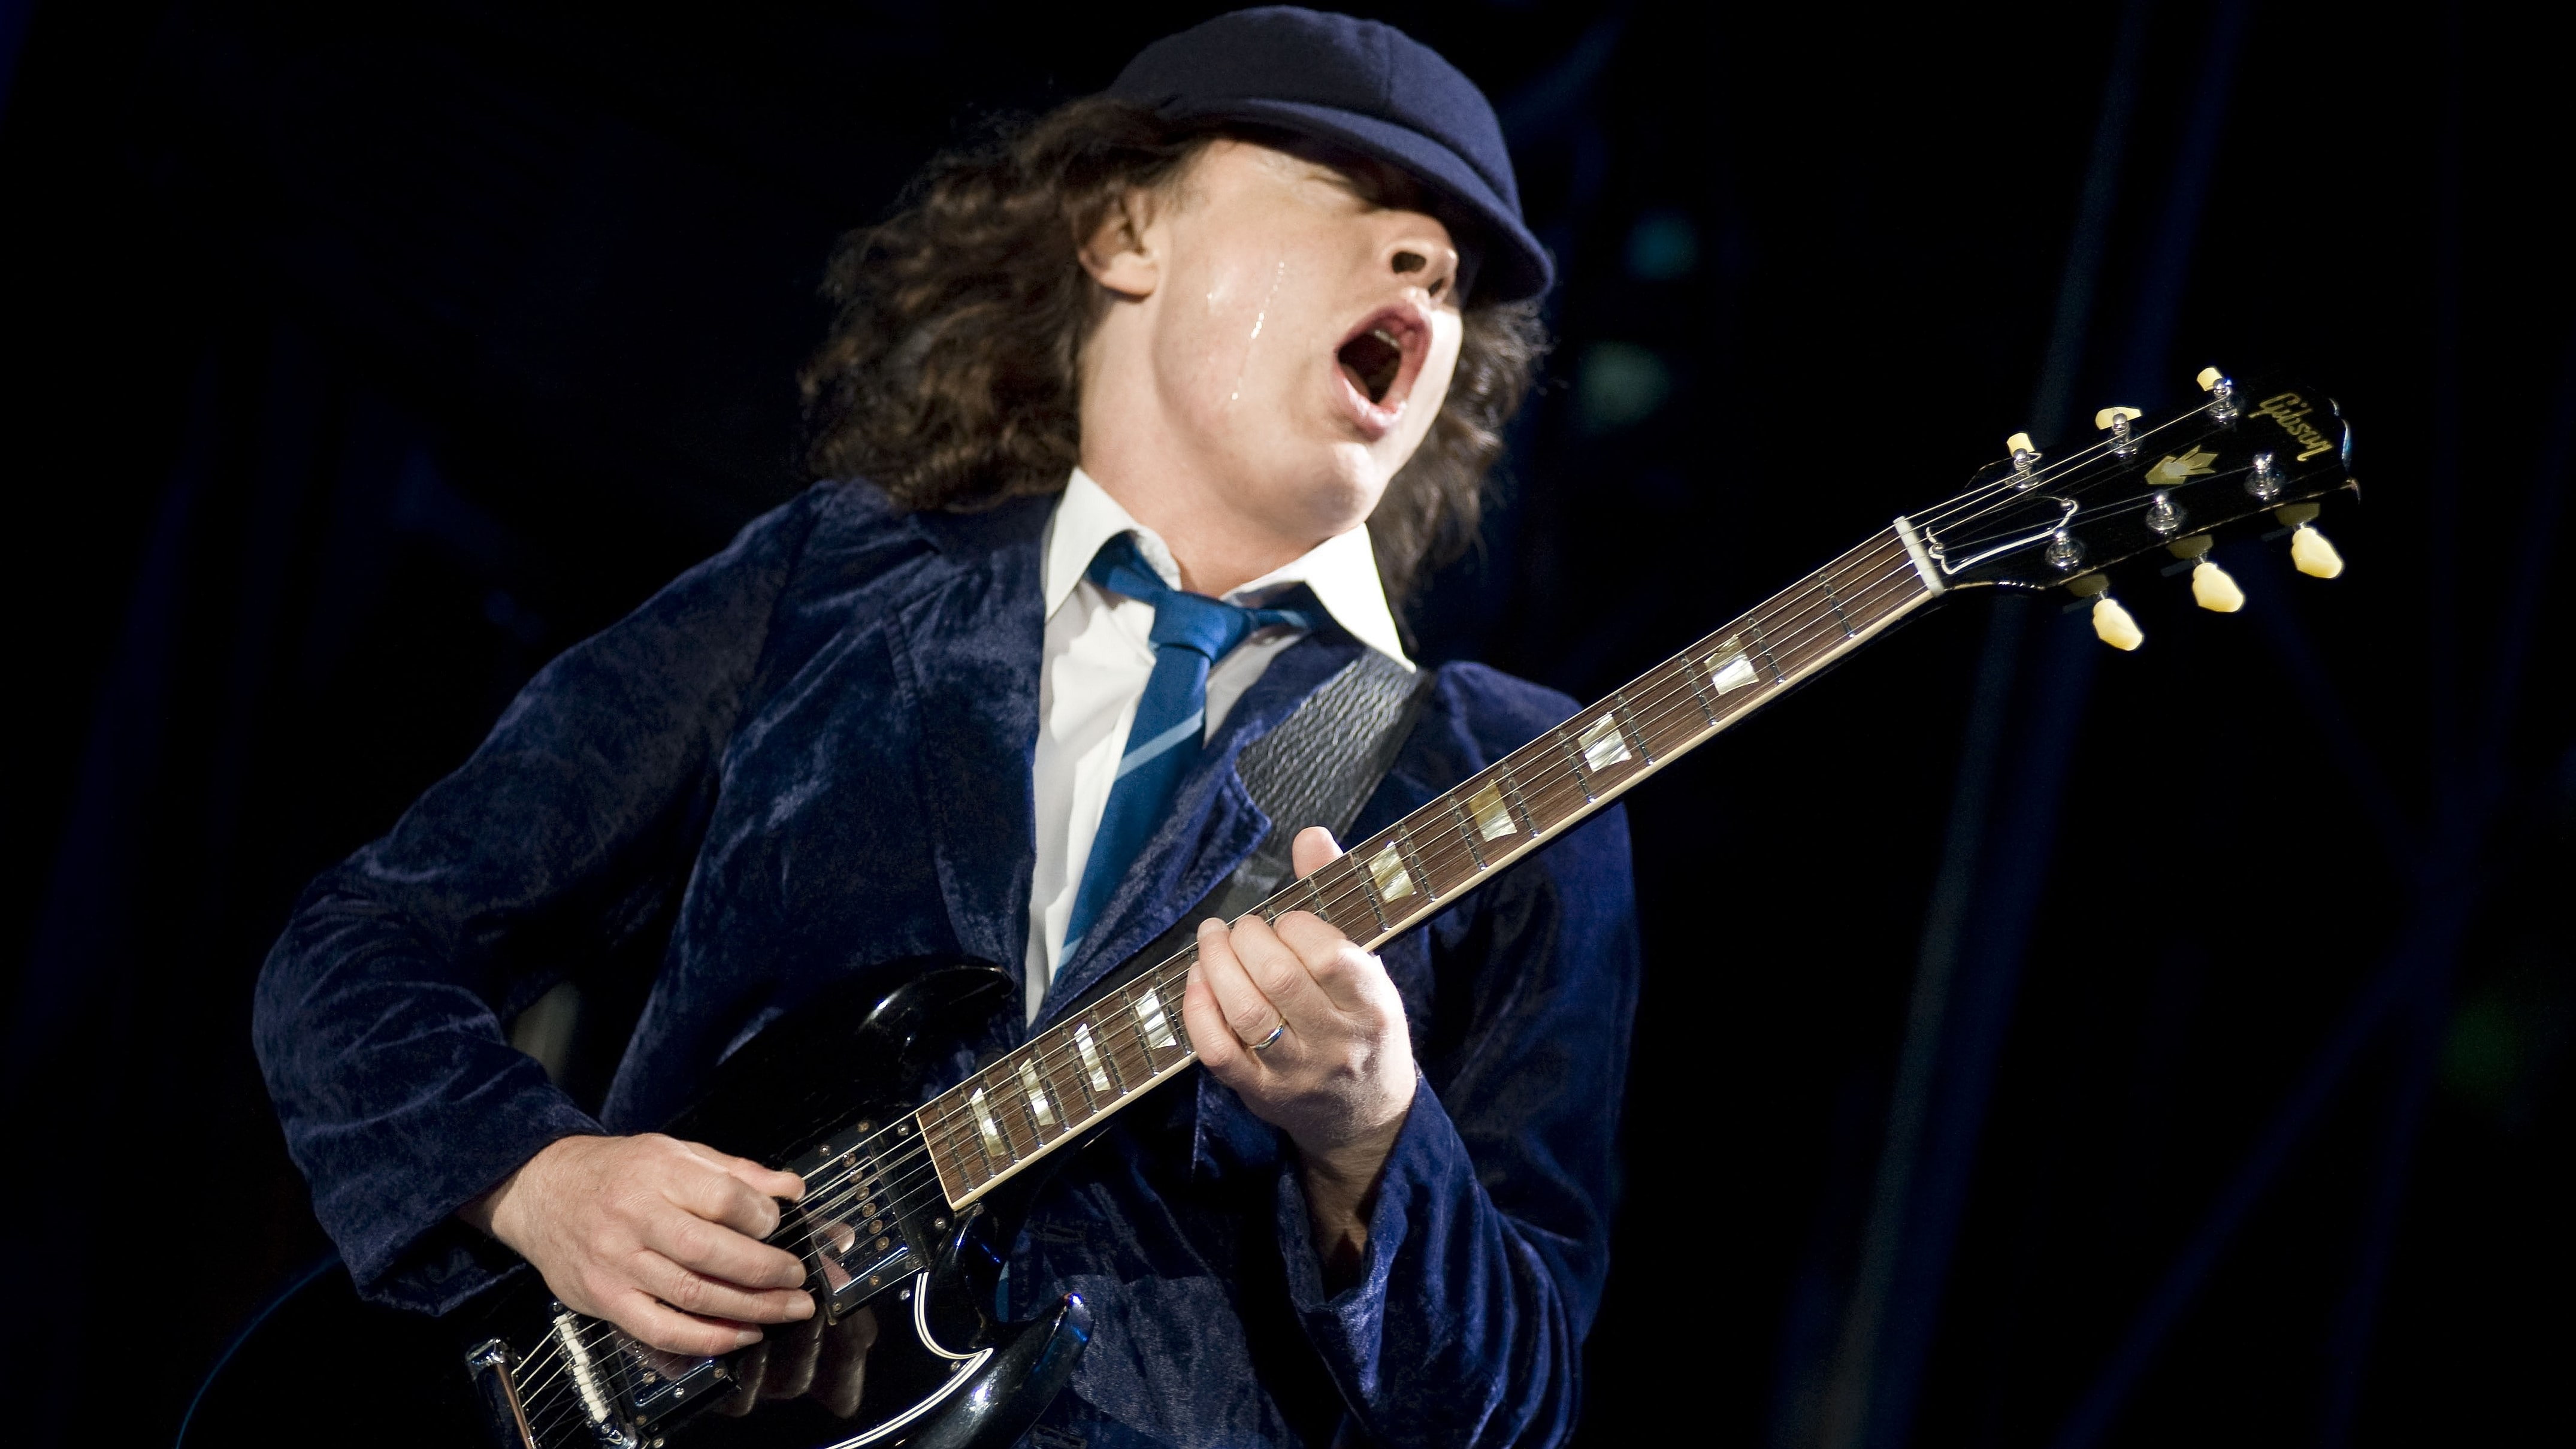 Ac dc, Angus young, Guitarist, Performance, music, musical instrument